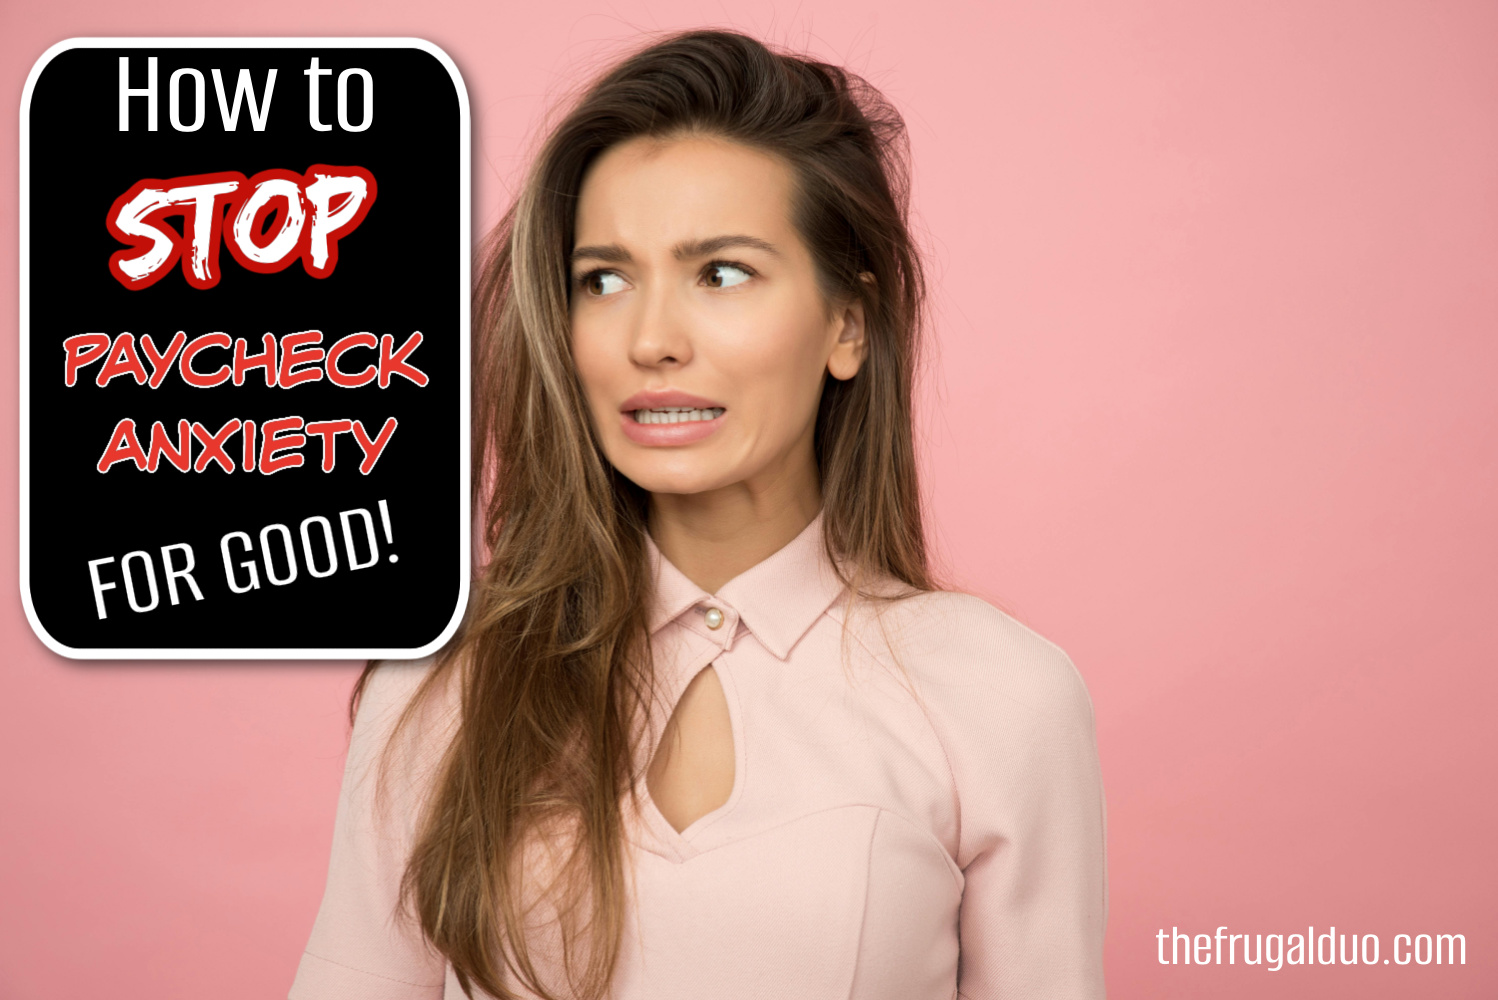 How to quickly stop paycheck anxiety for good!